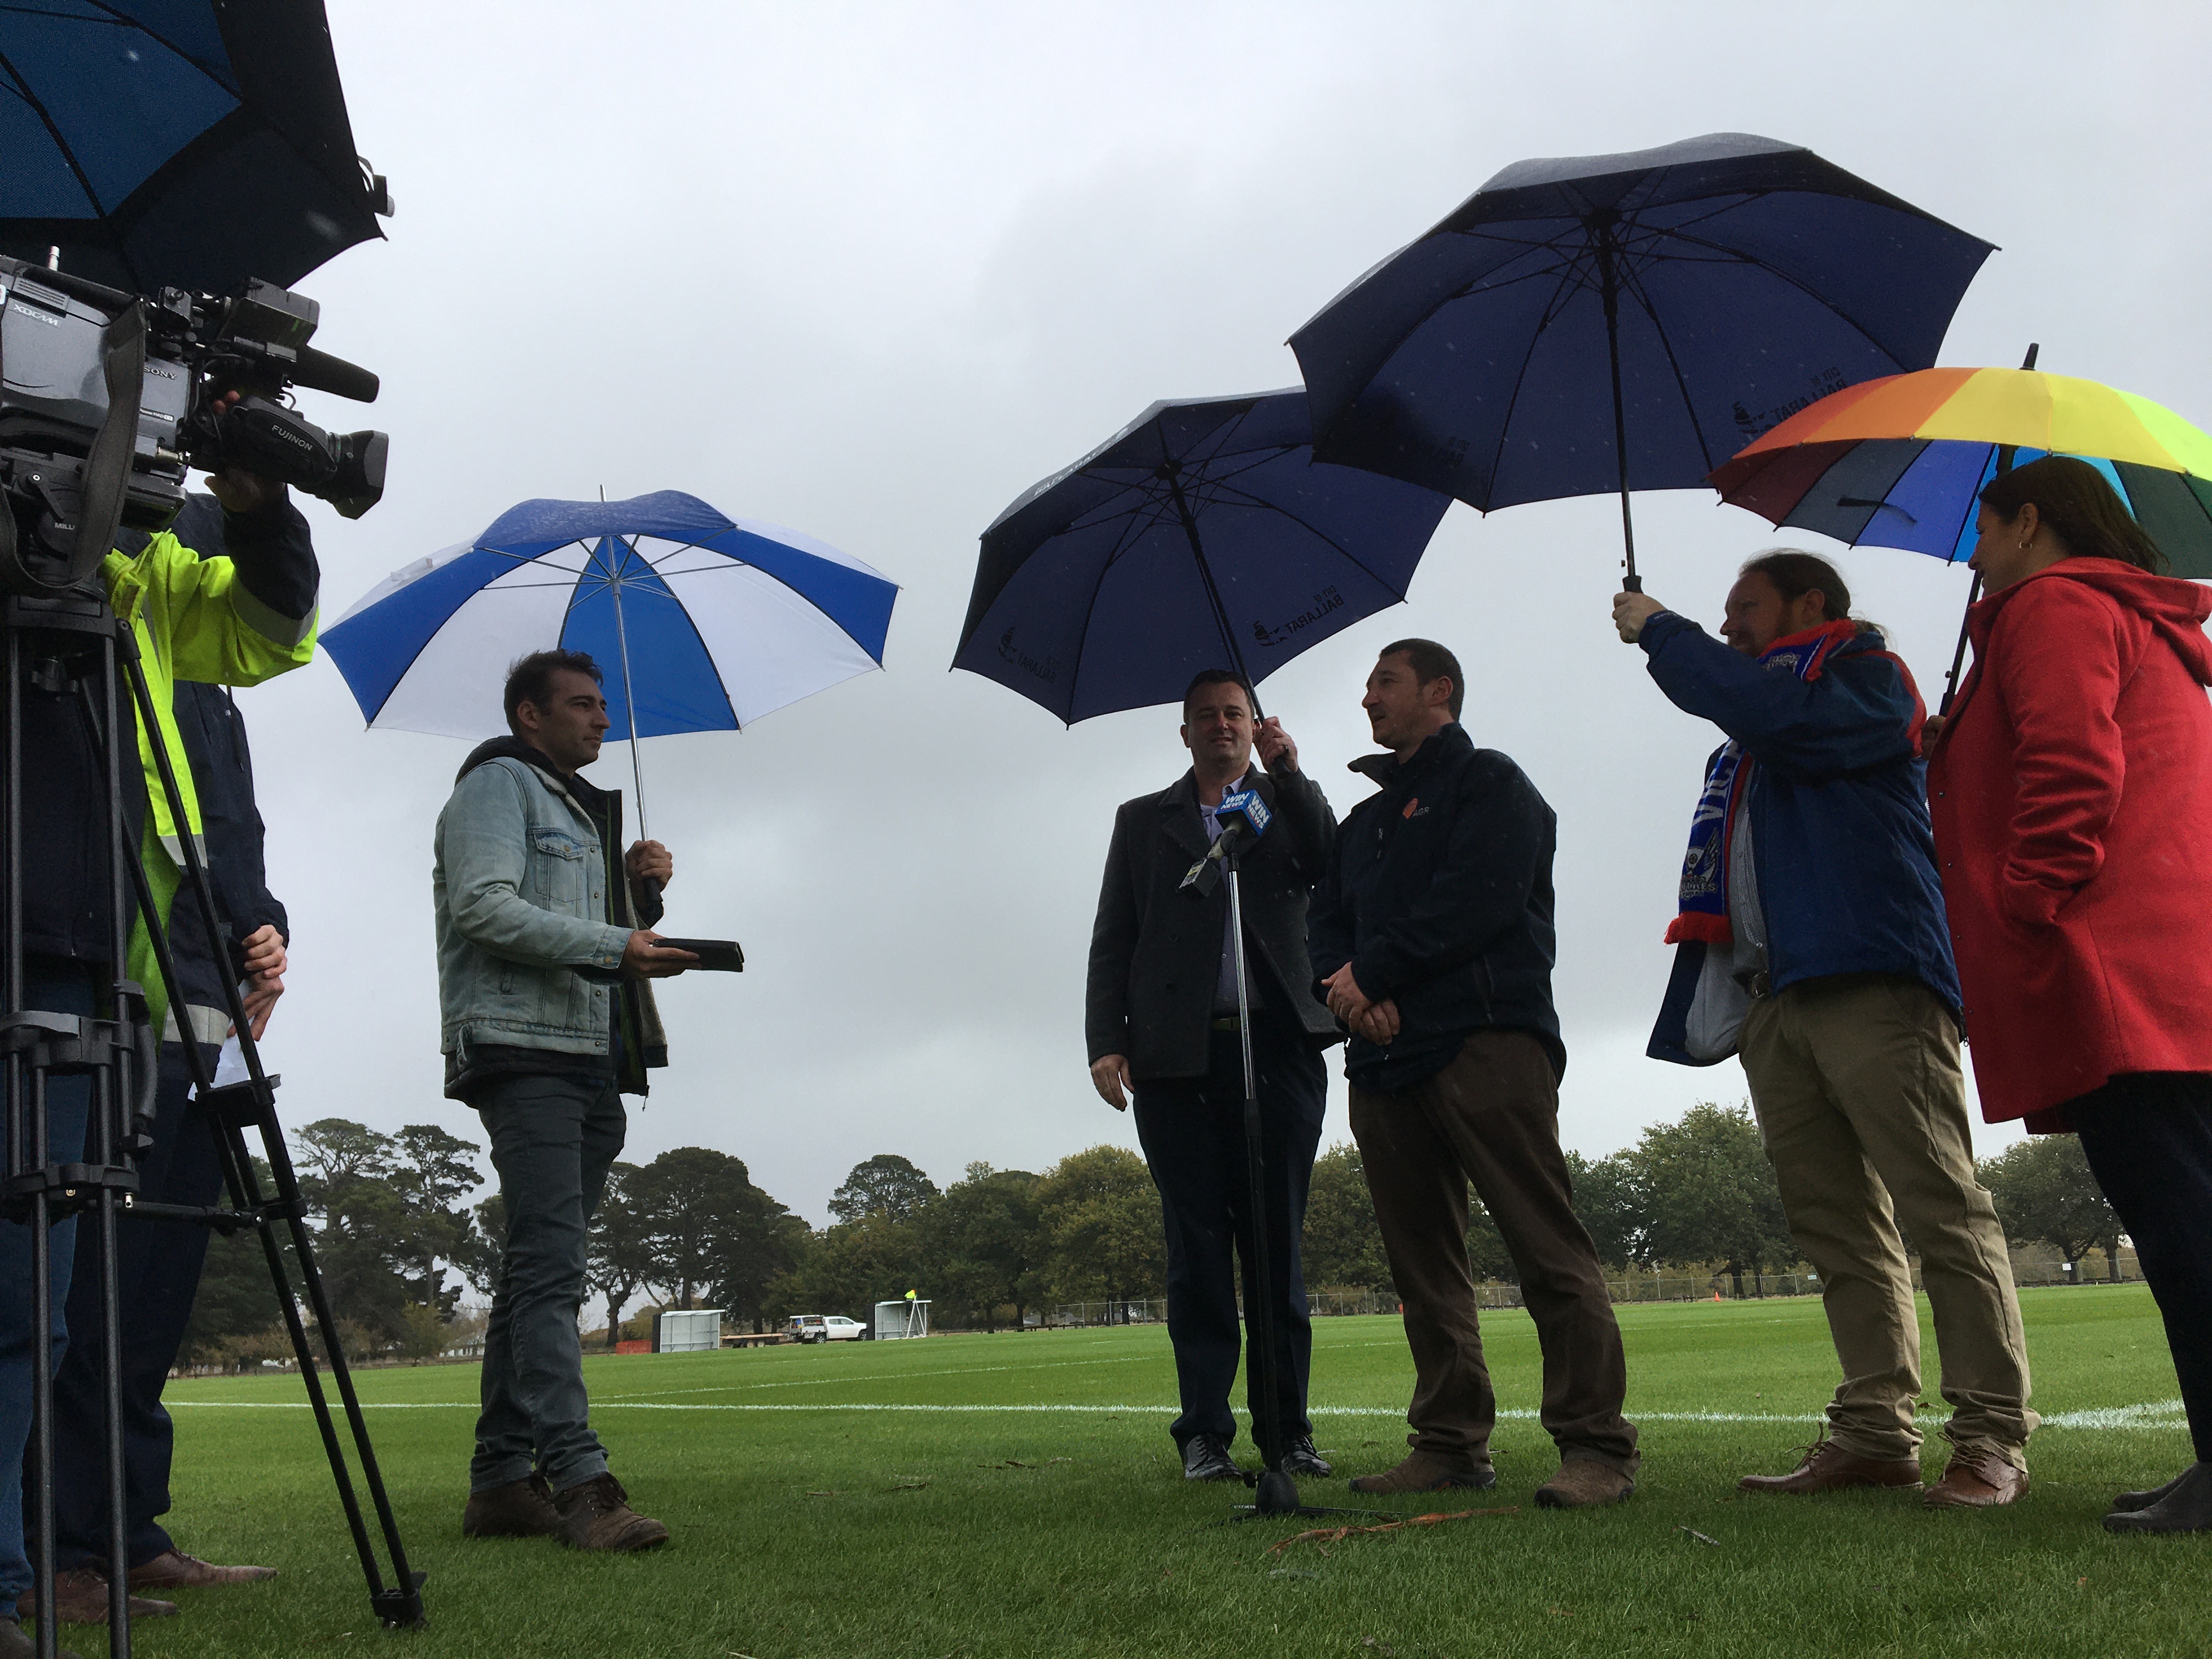 Media interviewing Ballarat Mayor Daniel Moloney, Member for Wendouree Juliana Addison MP, Dave Horwood from Lucas Cricket Club and Sean O'Meara from Victoria Park Football Club 